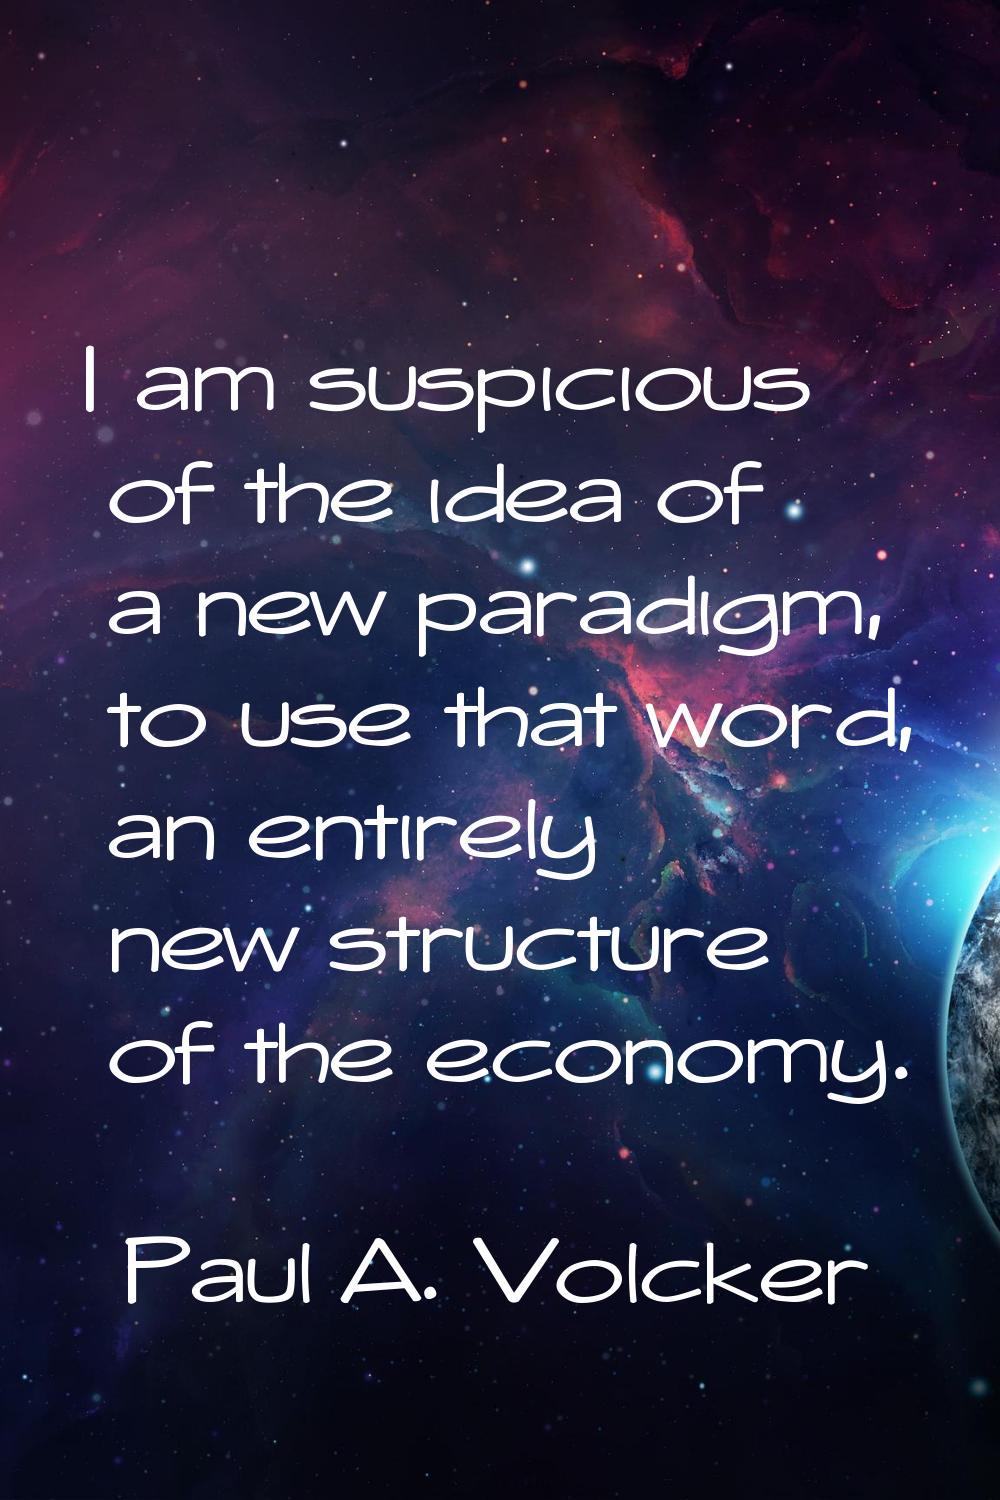 I am suspicious of the idea of a new paradigm, to use that word, an entirely new structure of the e